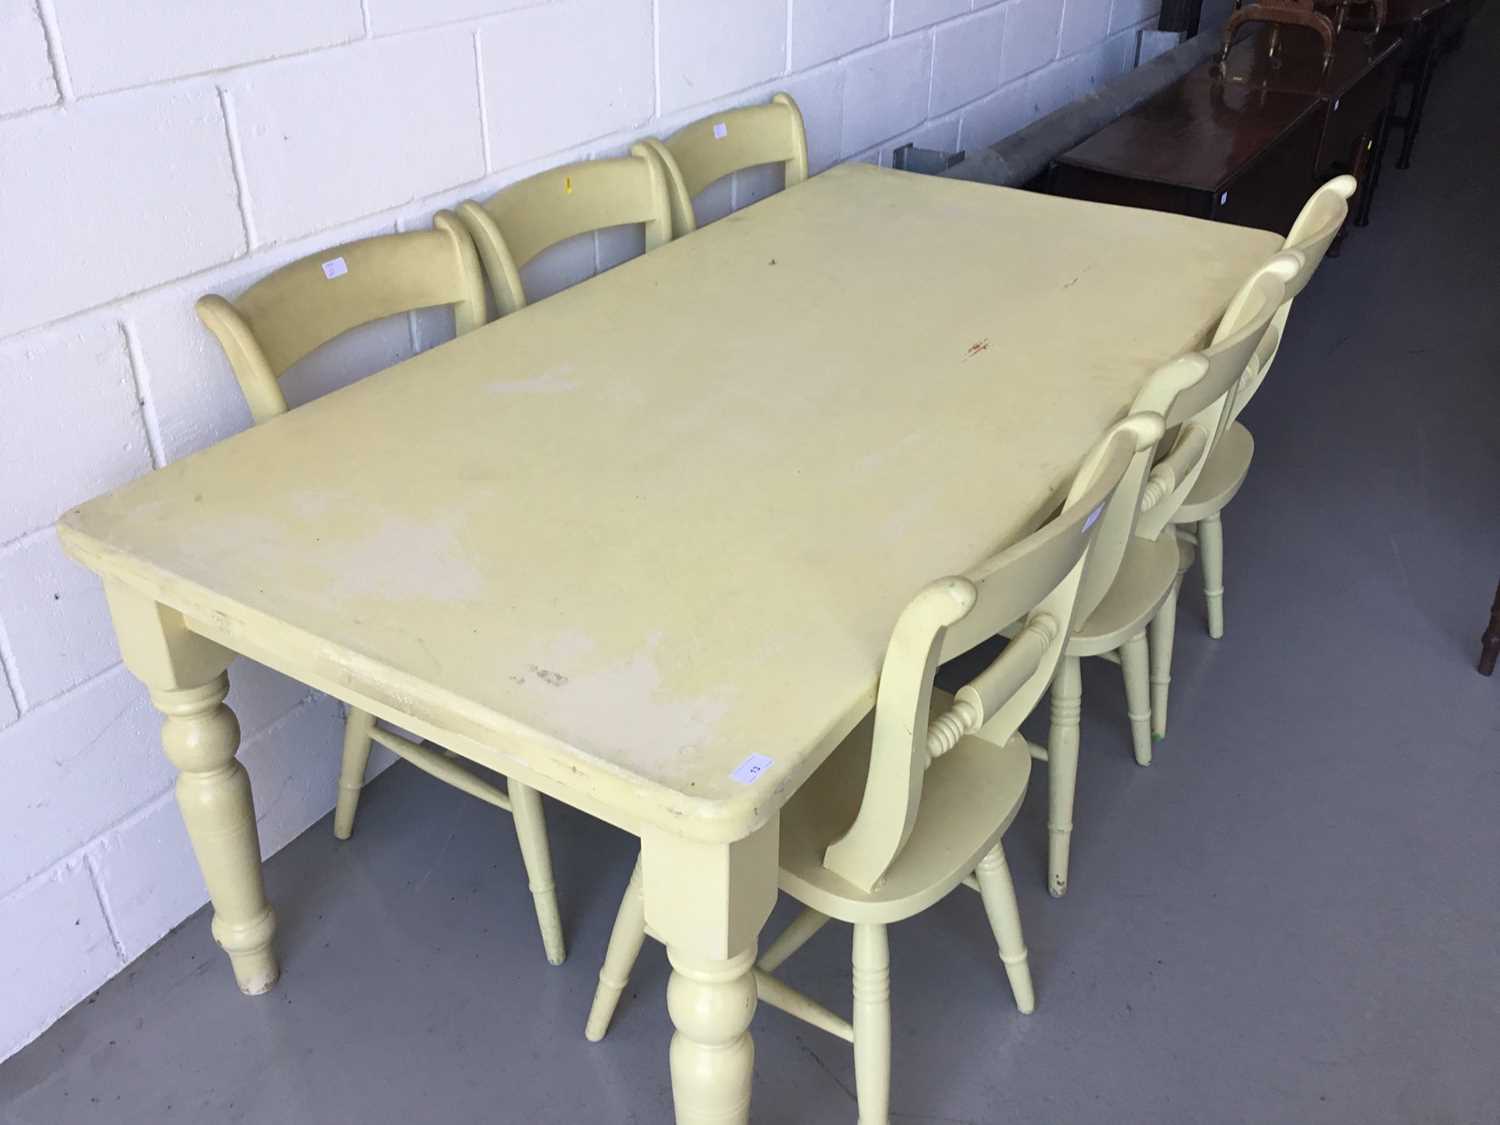 Lot 13 - Large painted pine kitchen table on turned legs, together with six similarly painted chairs (7 pieces) table 182 cm length, 90cm width, 76cm height